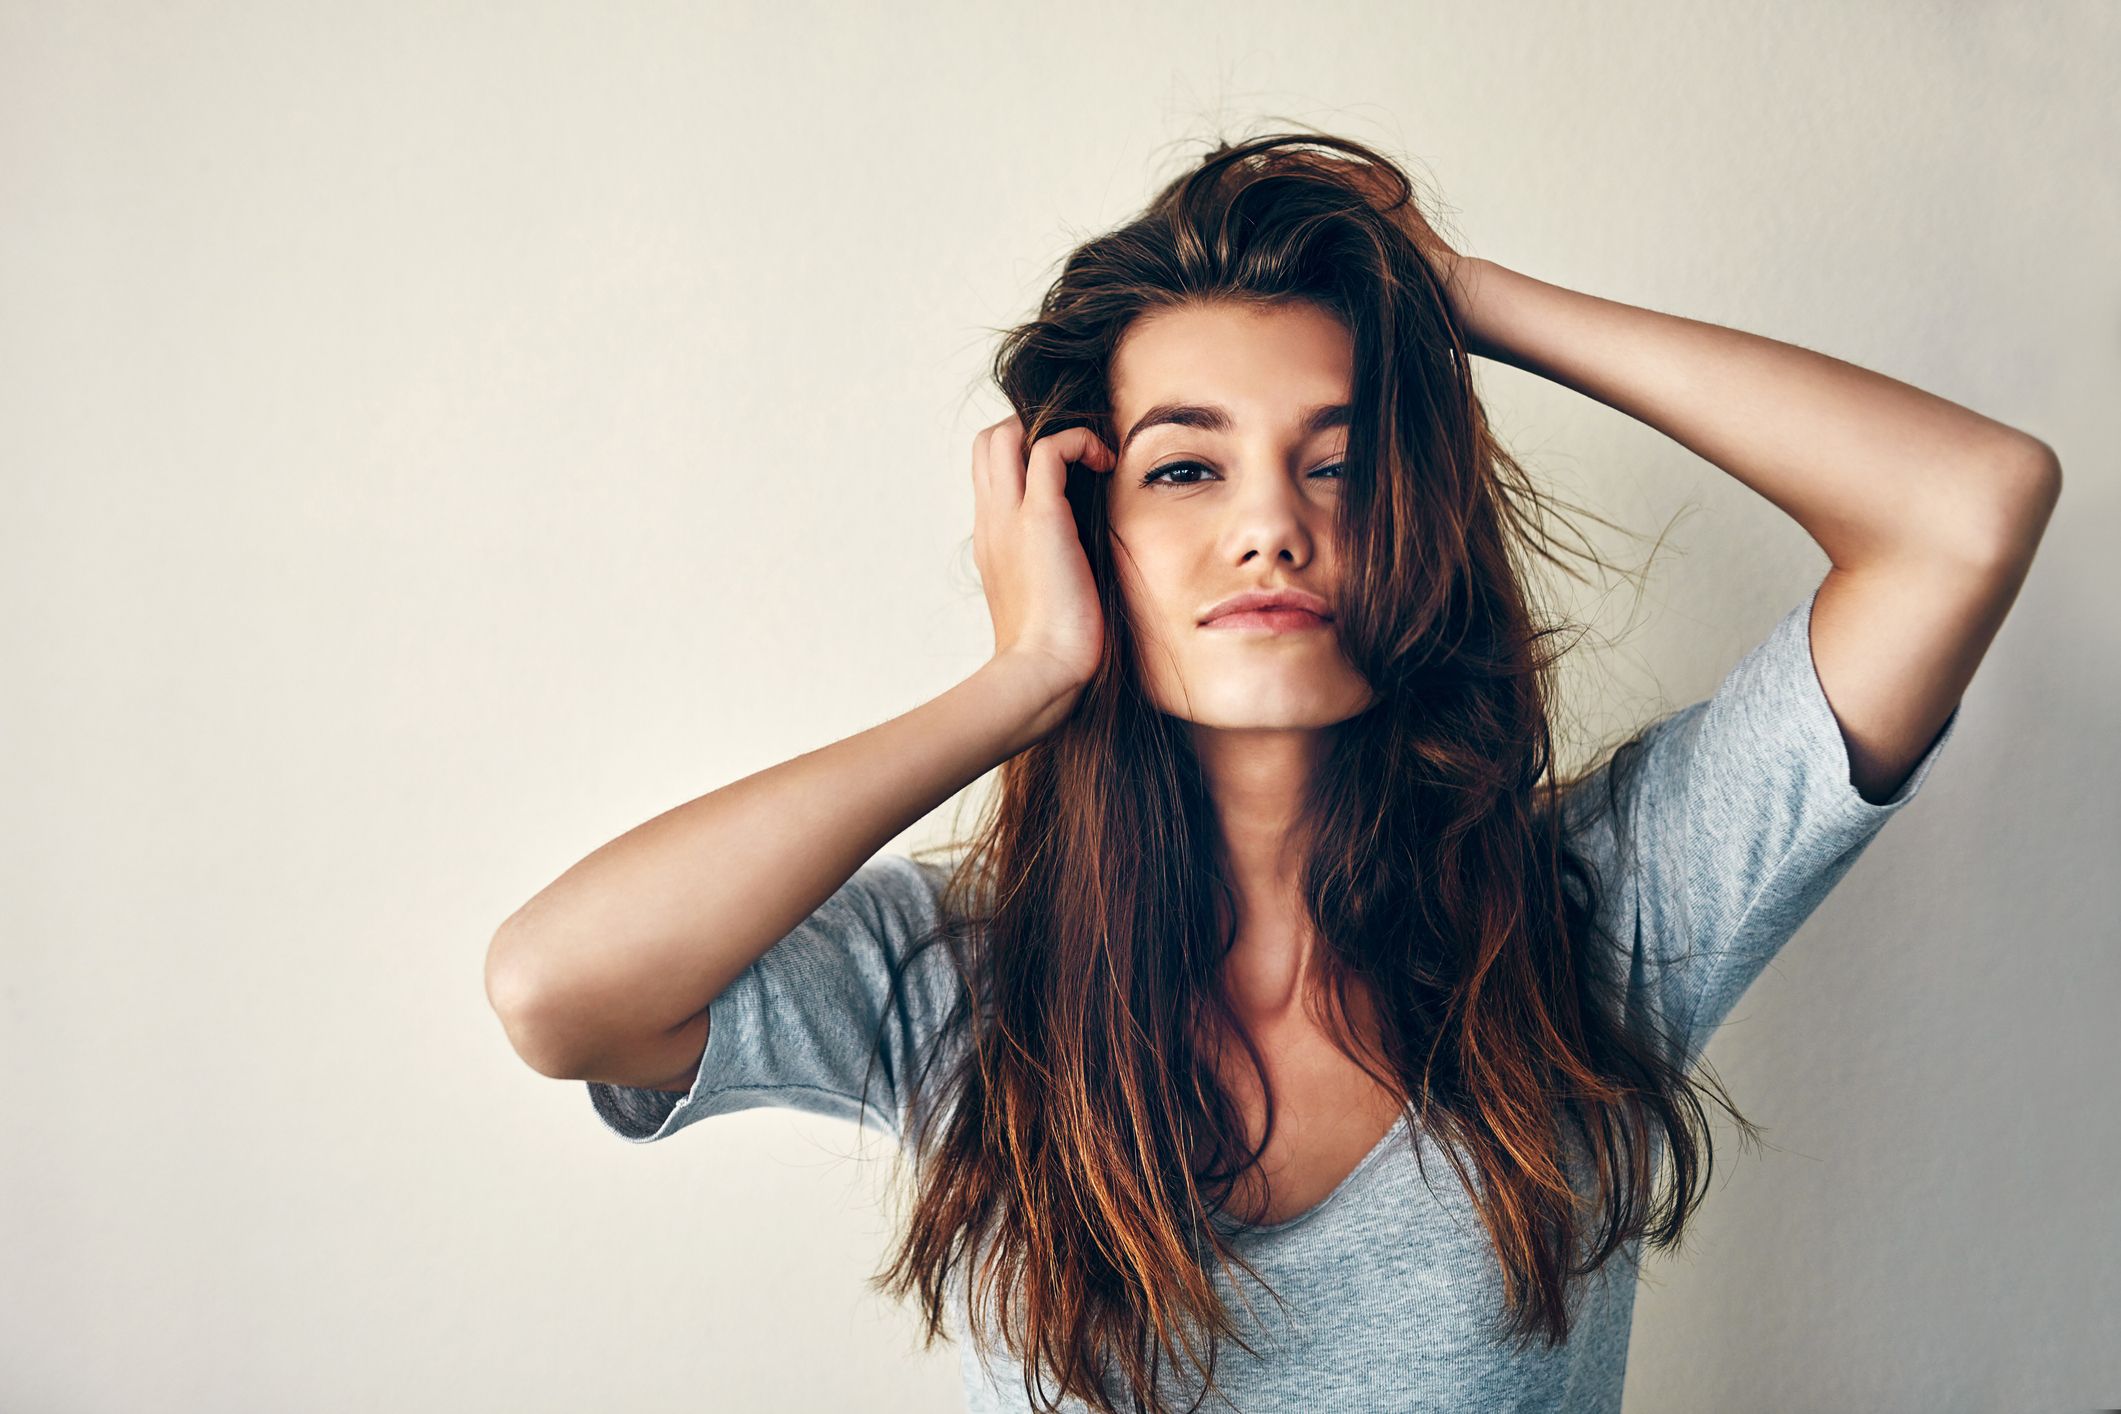 How To Treat Dry, Damaged Hair - Causes, Tips For Healthier Hair